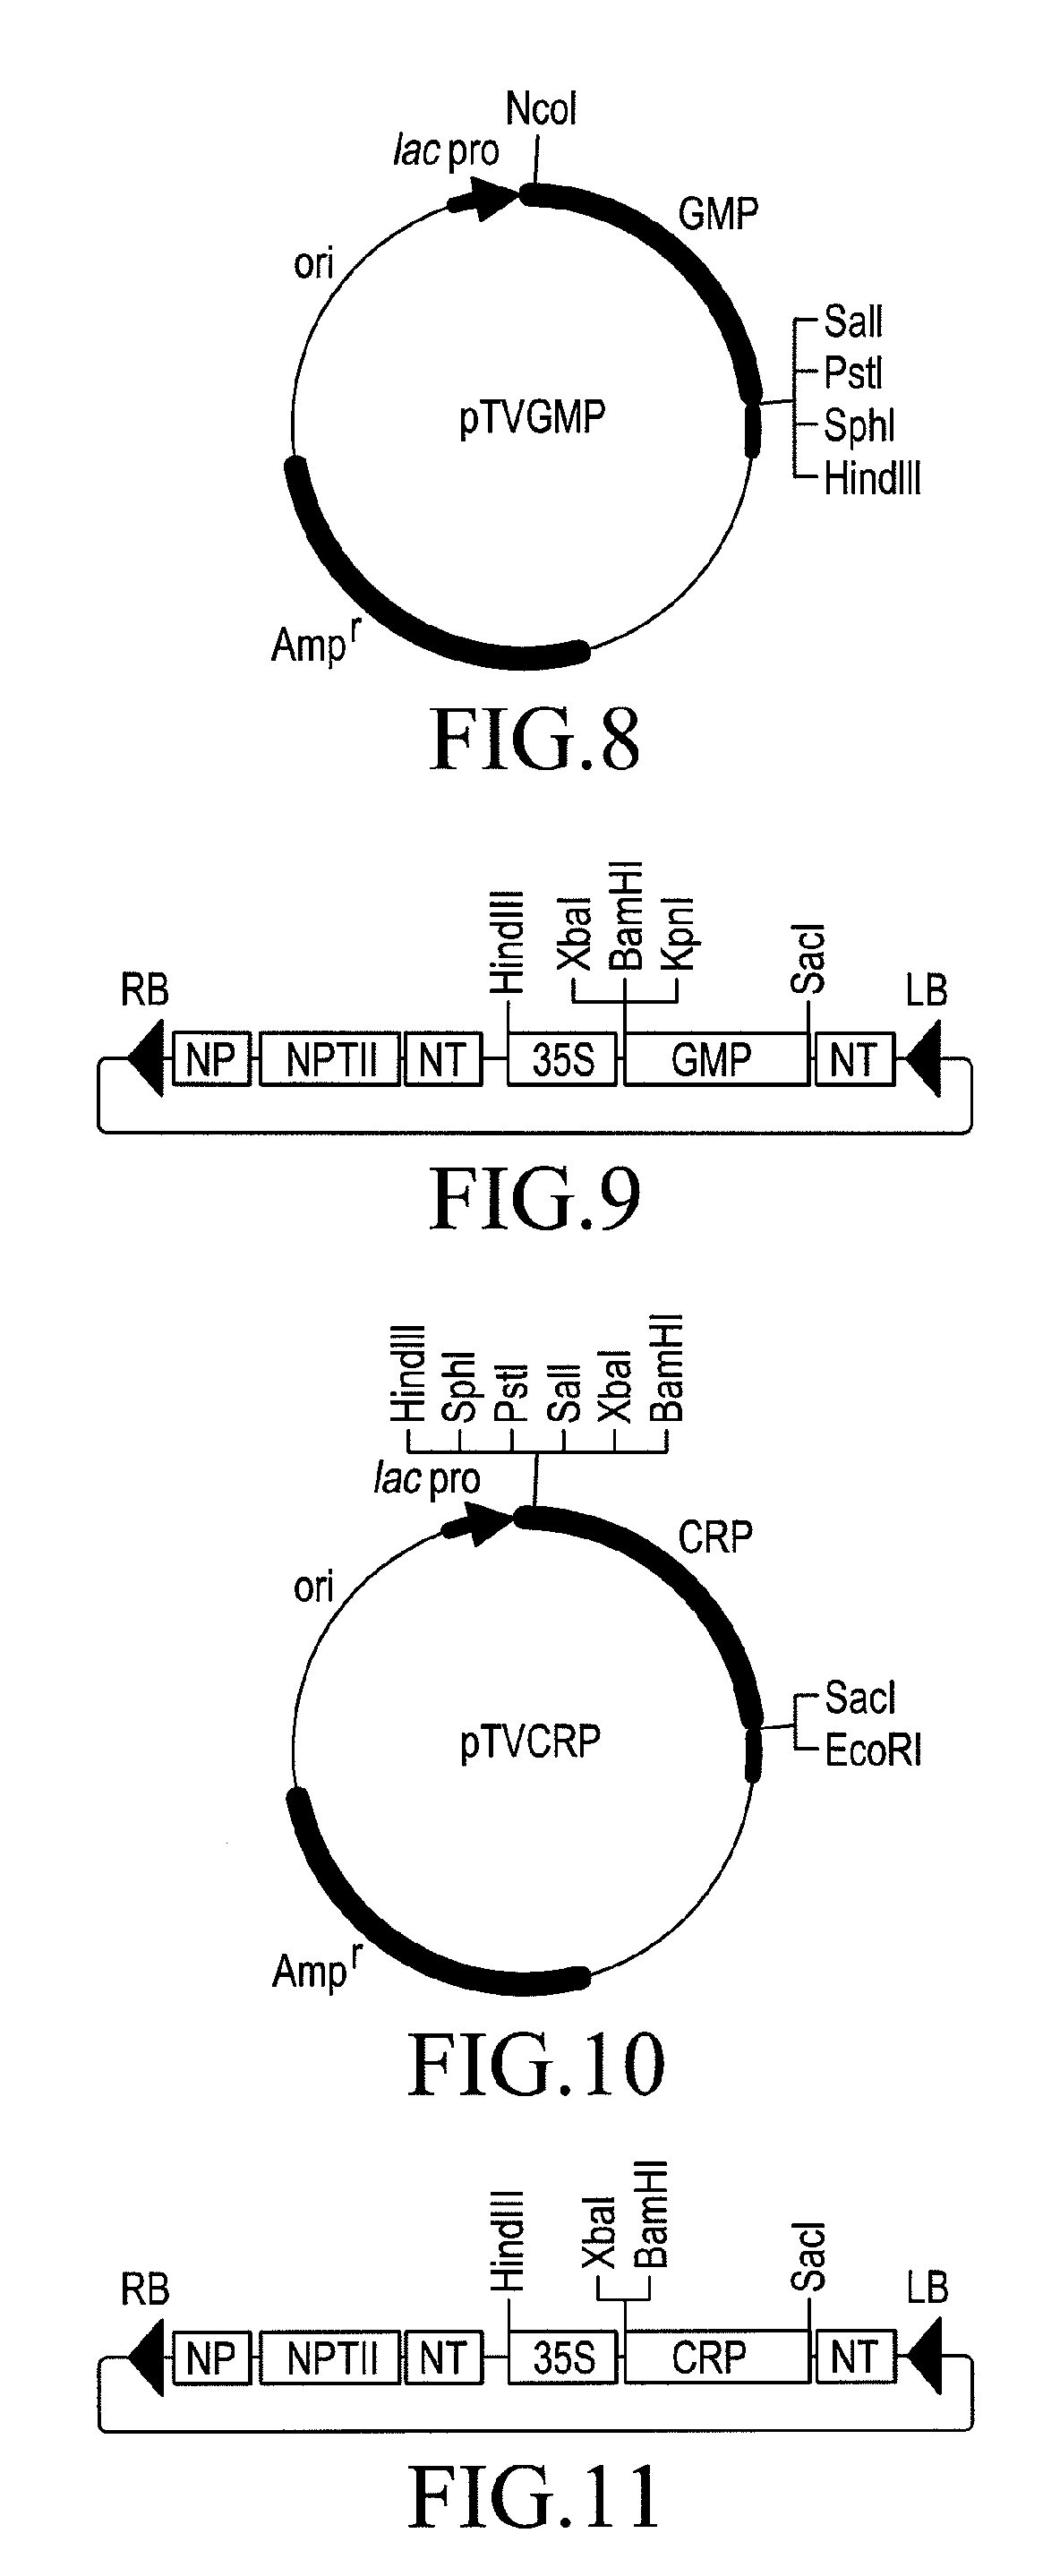 Method for producing transgenic plants resistant to weed control compounds which disrupt the porphyrin pathways of plants